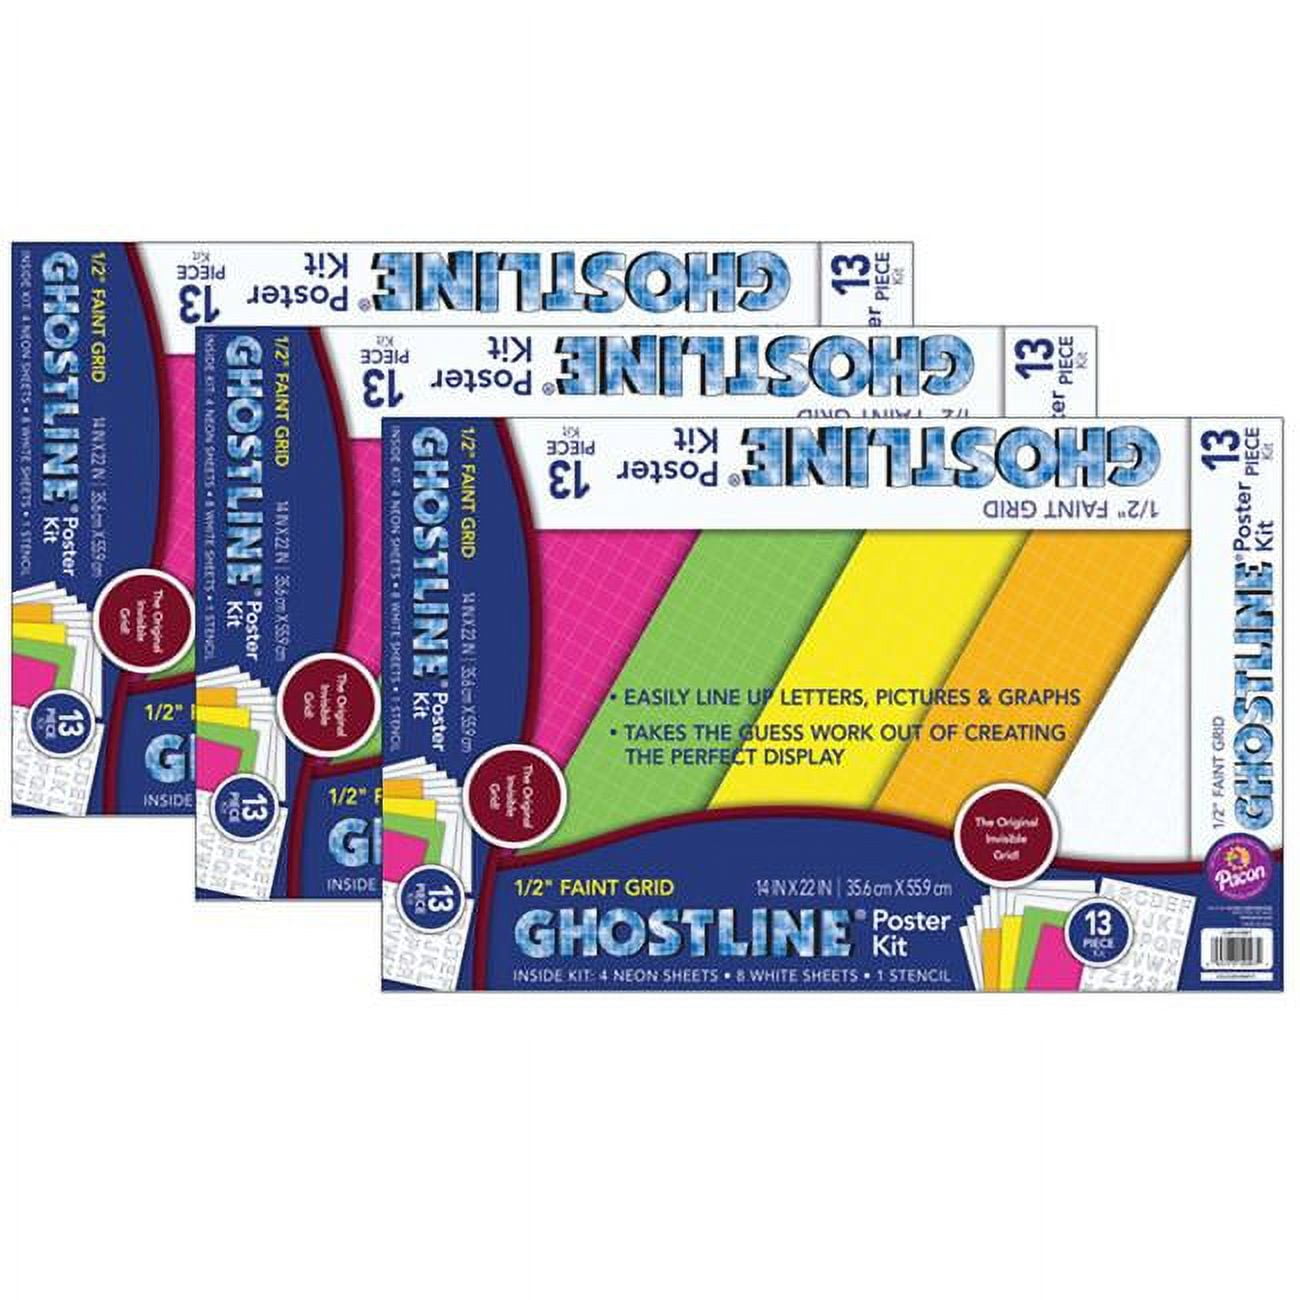 Artline 2mm Bullet Poster Markers - Sold by the Dozen